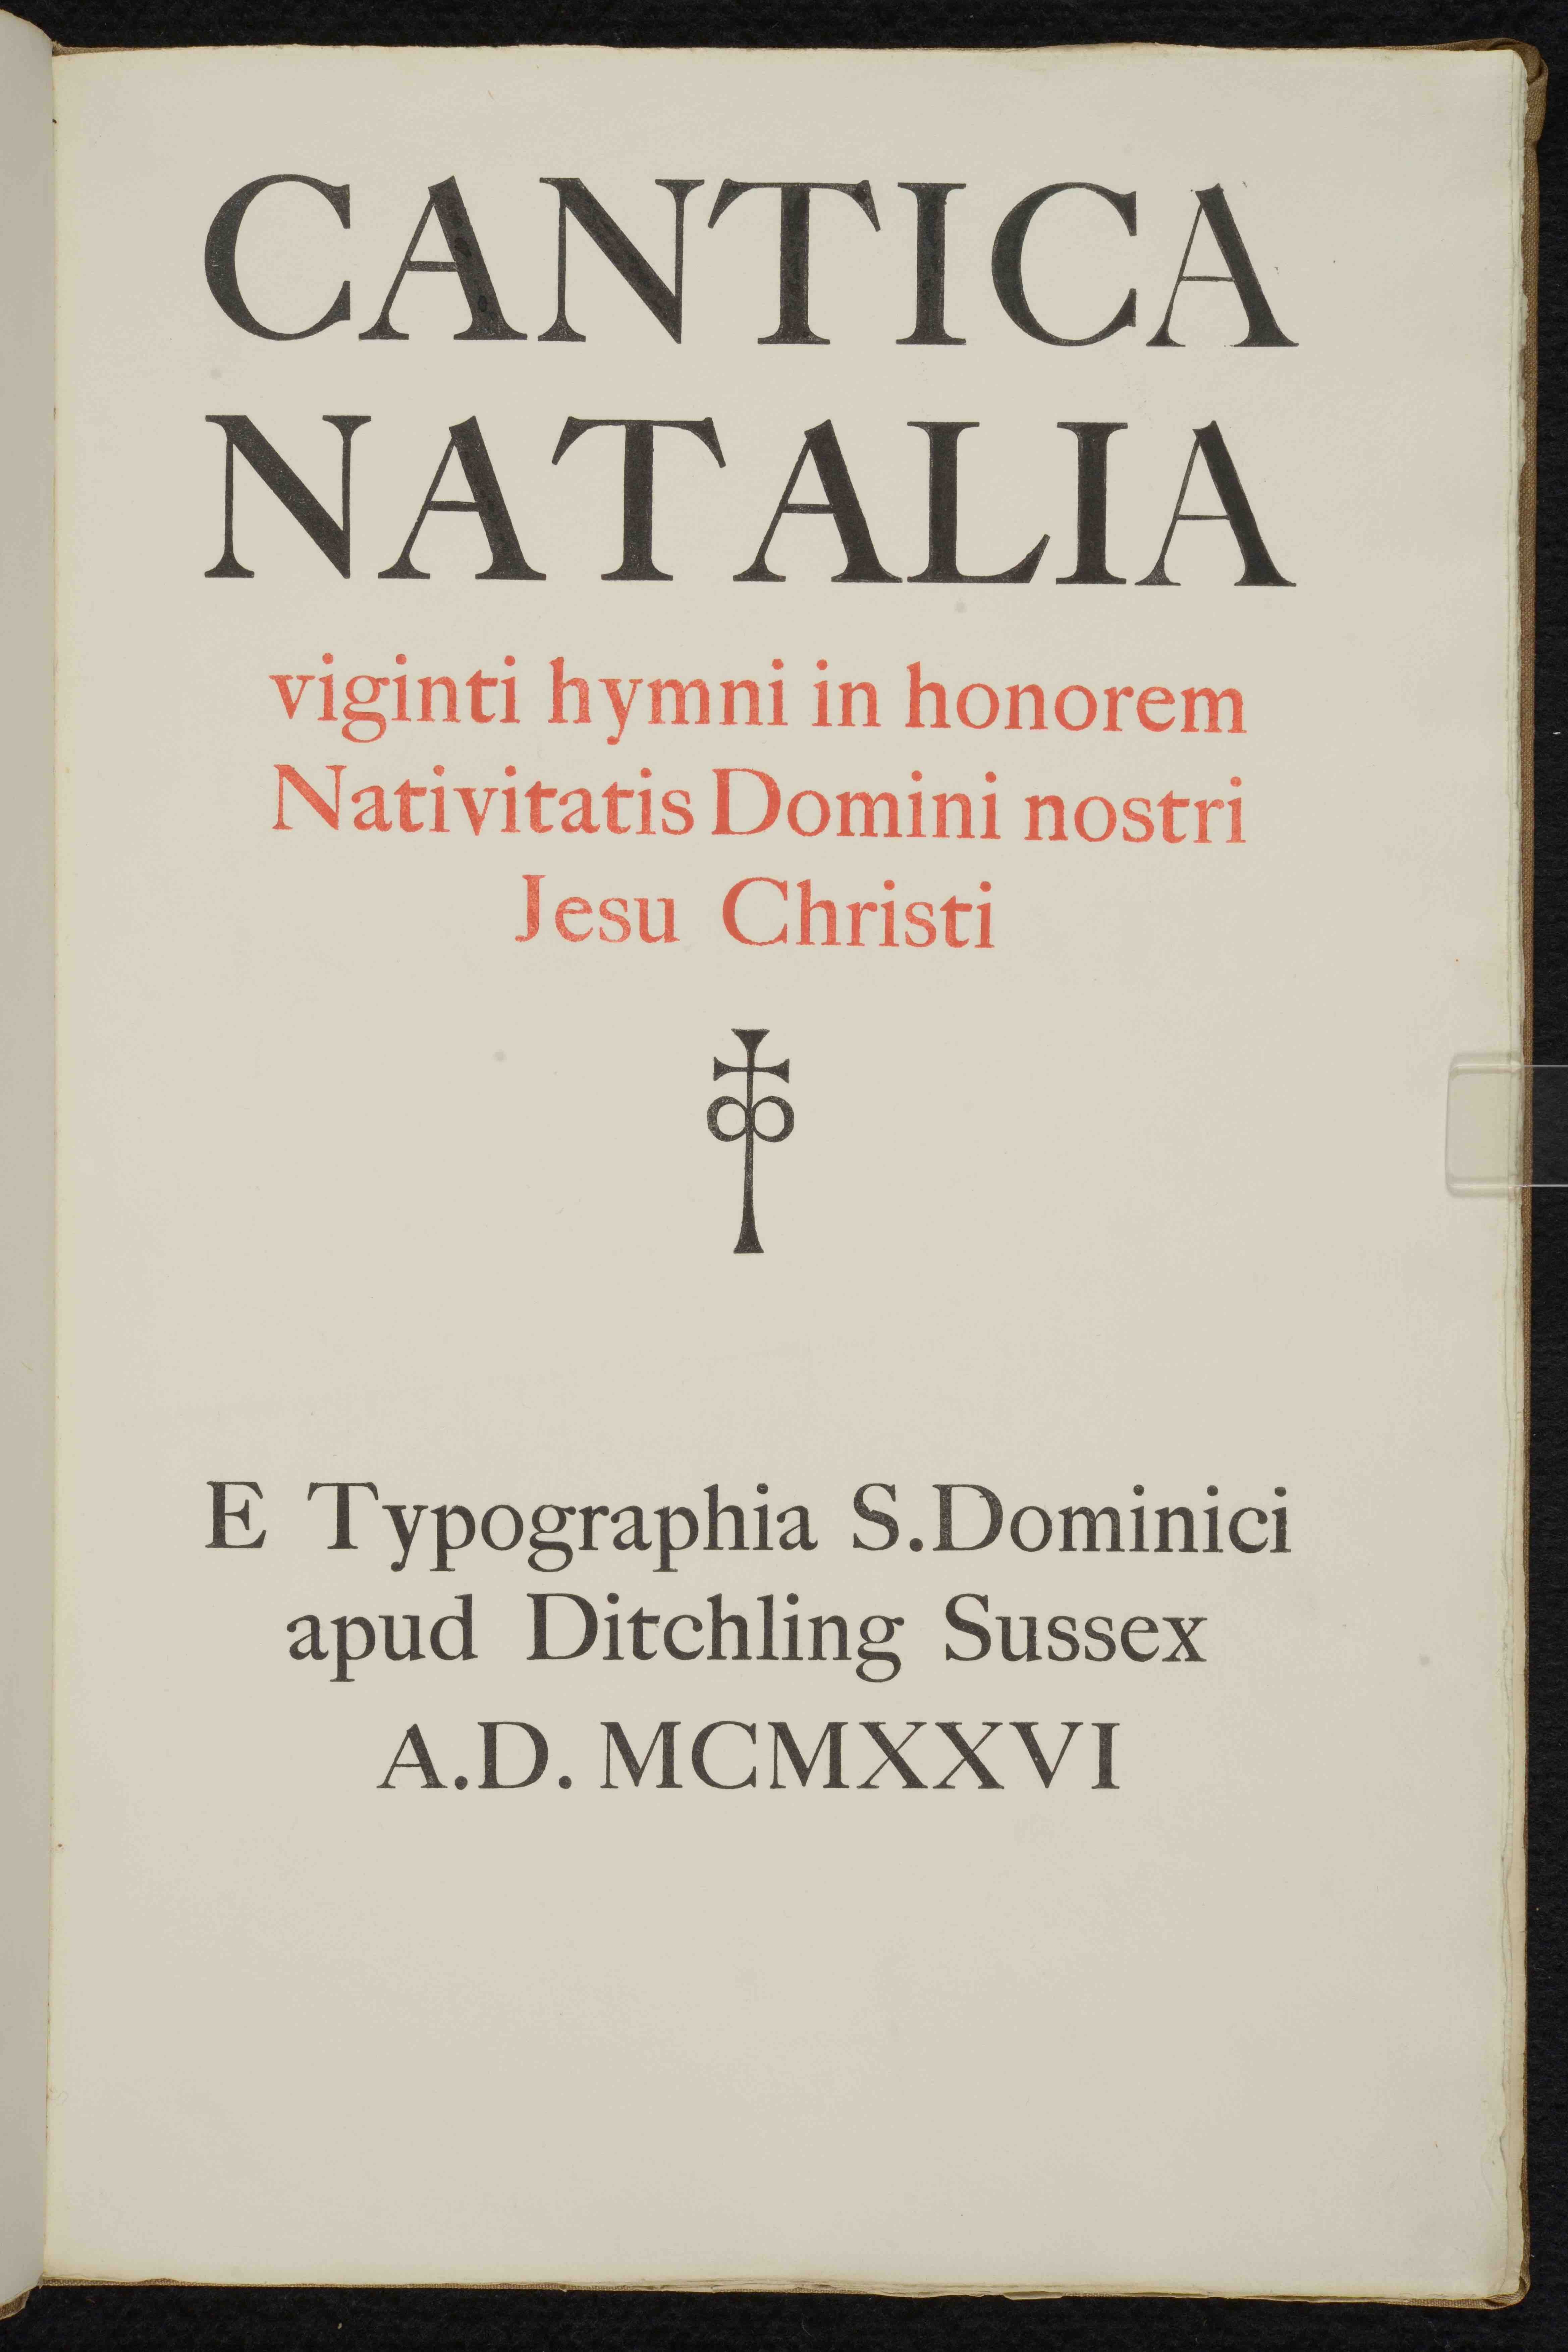 Title page from Cantica Natalia